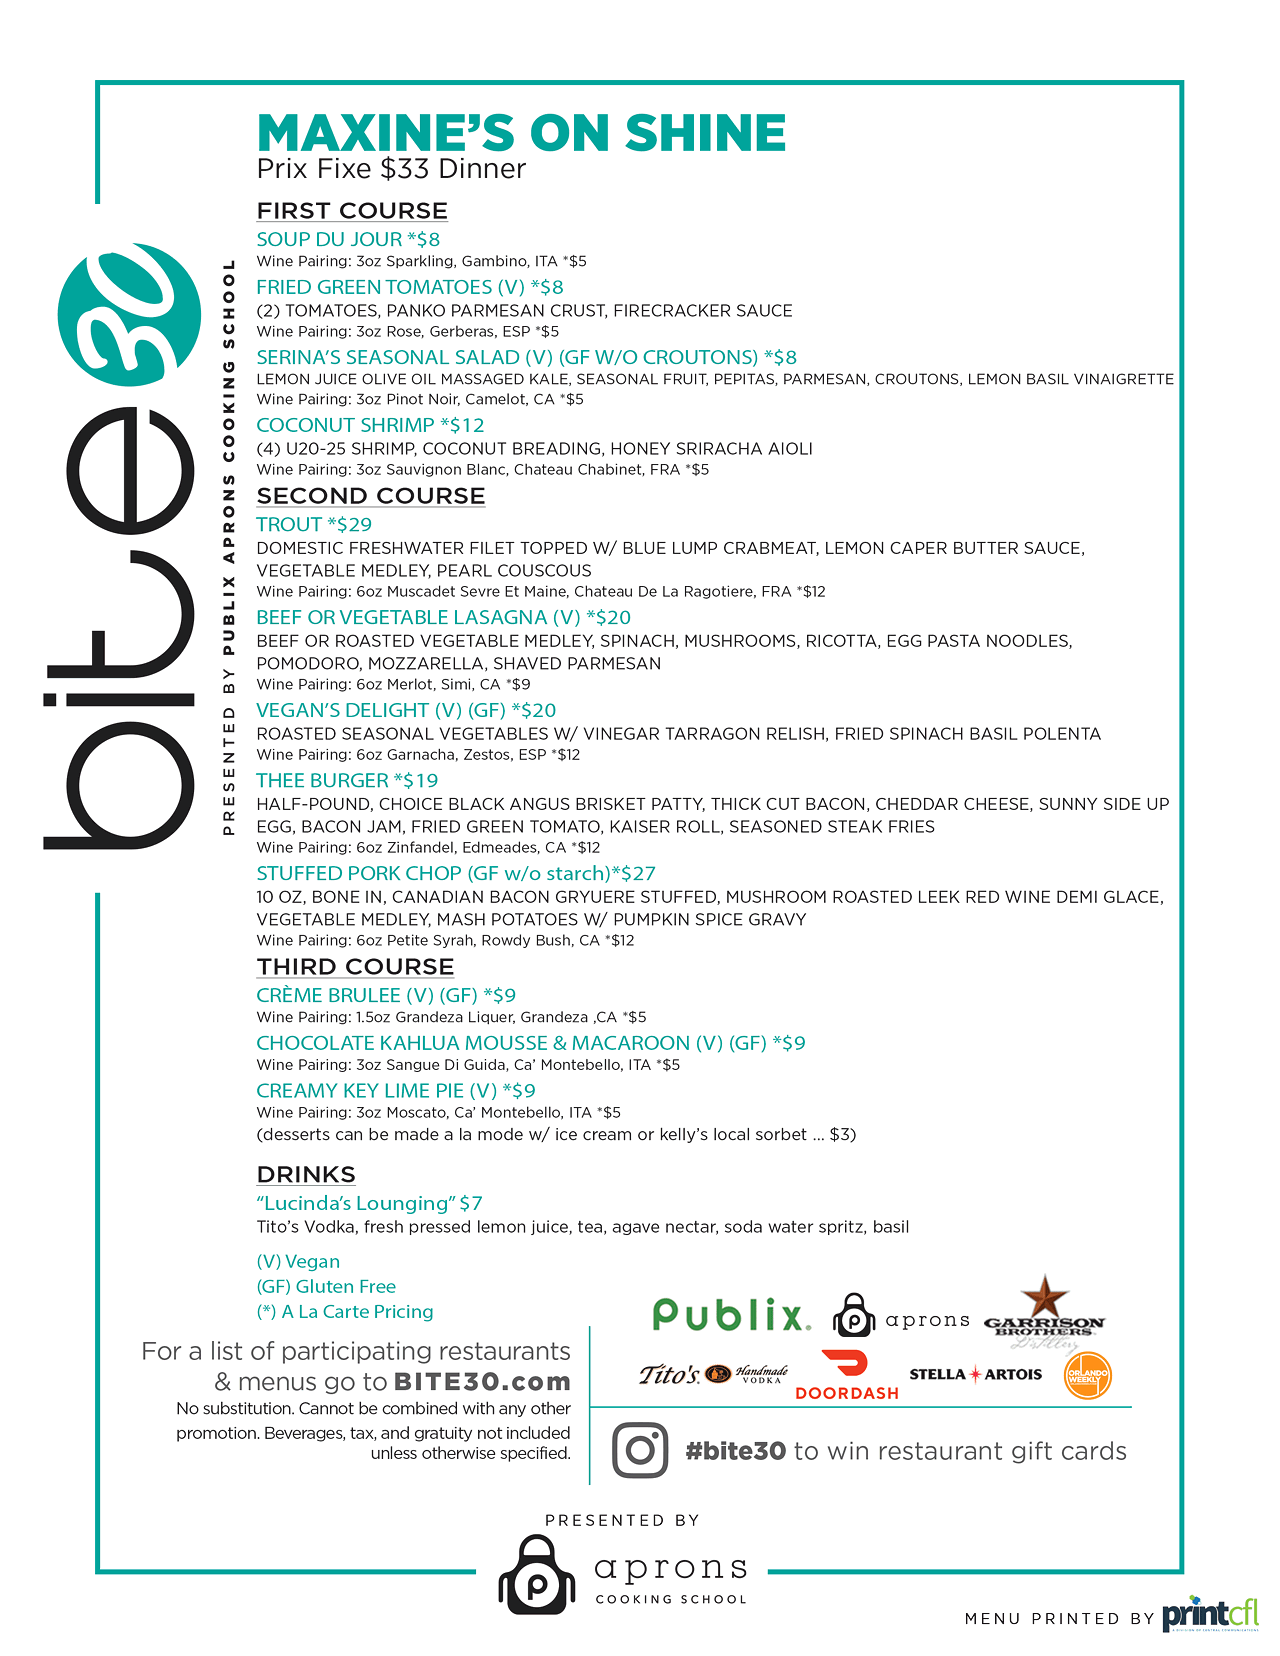 Here are all the menus for Orlando's Bite30 2022